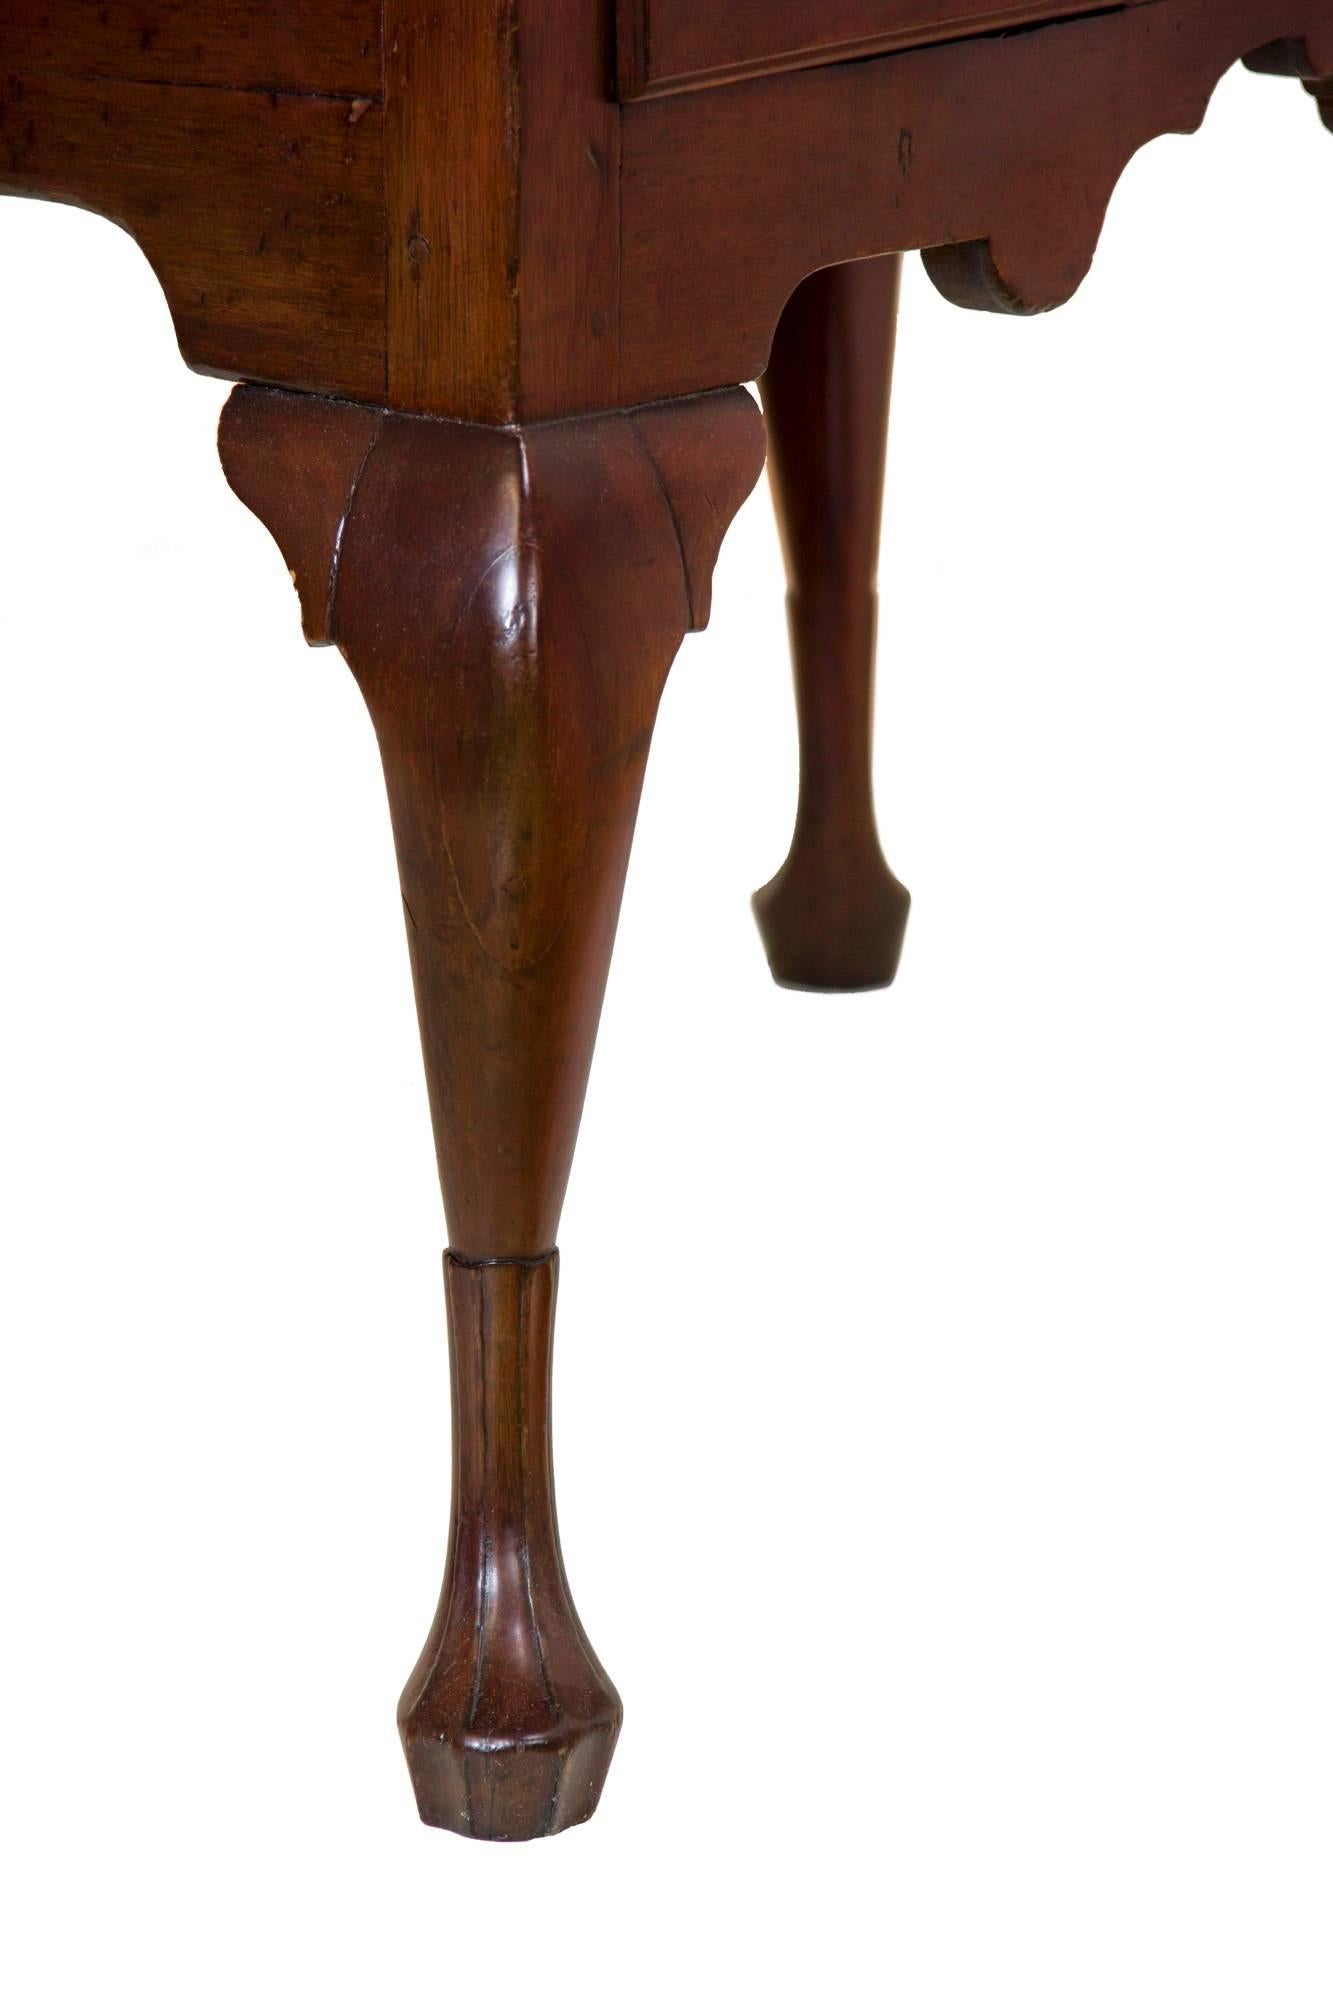 This lowboy is composed of fine, dense, heavy island (Cuban) mahogany and has a solidness with a finely sculptured and traditional base skirt, all of which is supported on beautifully sculpted Queen Anne legs with stocking feet. Note the strong